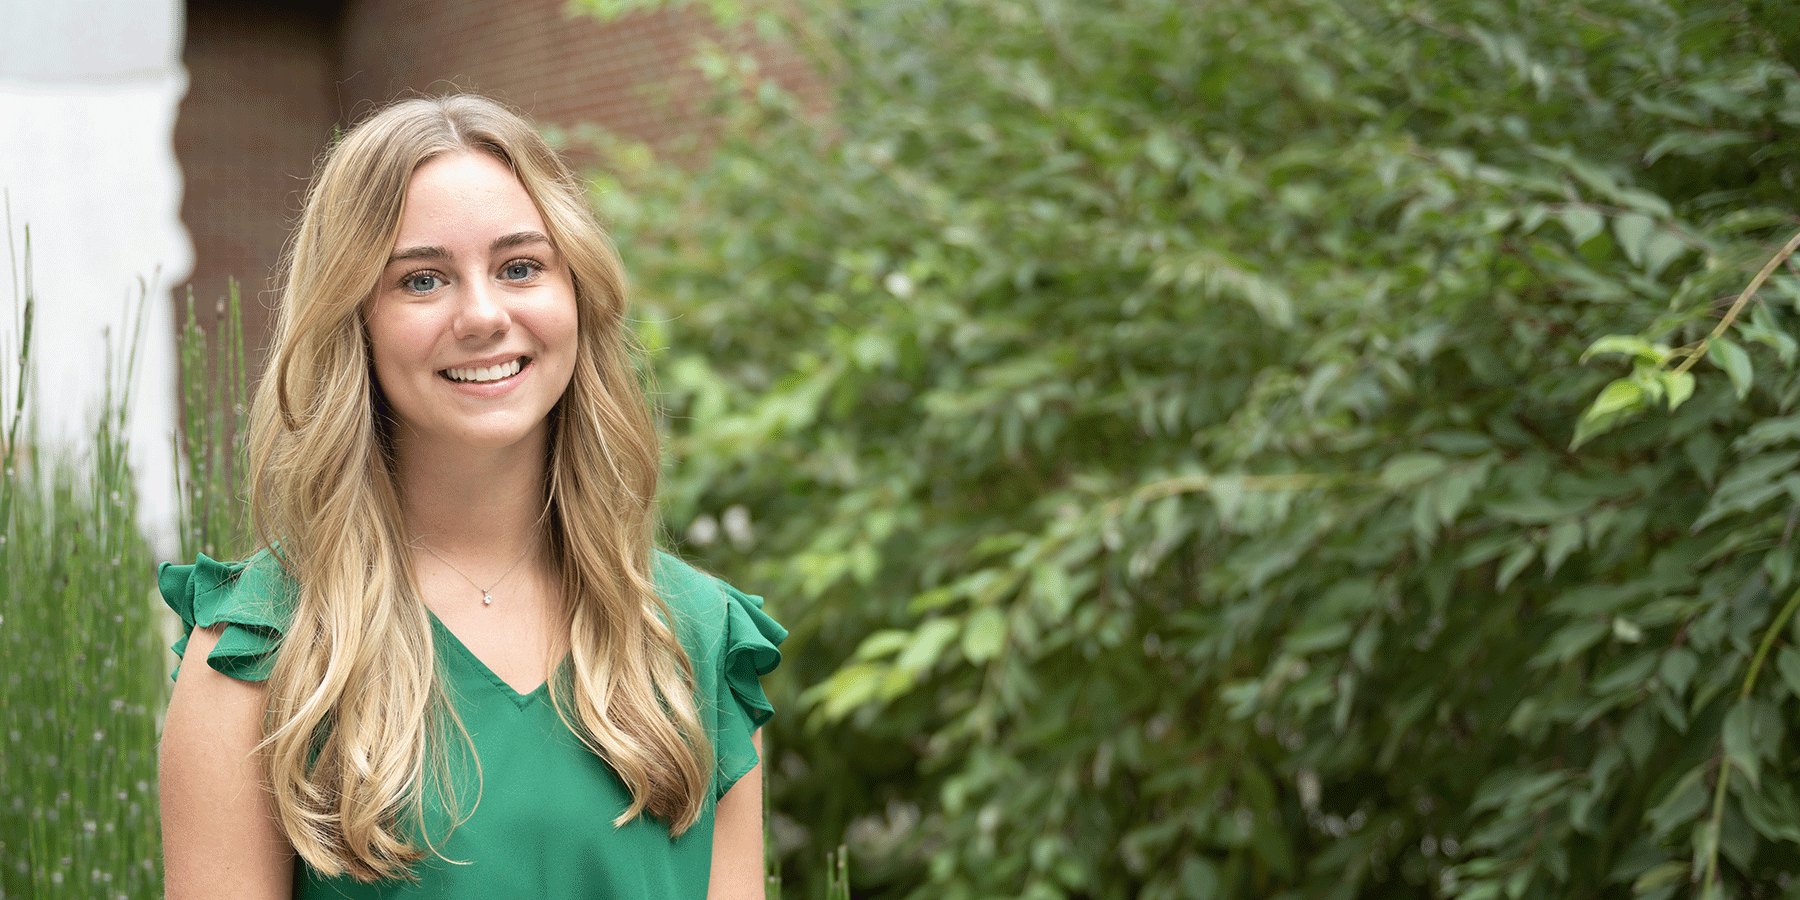 A smiling, blonde, female student wearing a green, shoulder-sleeve blouse is shown outdoors on campus, with green leaves and grasses in the background and to the right of the image.